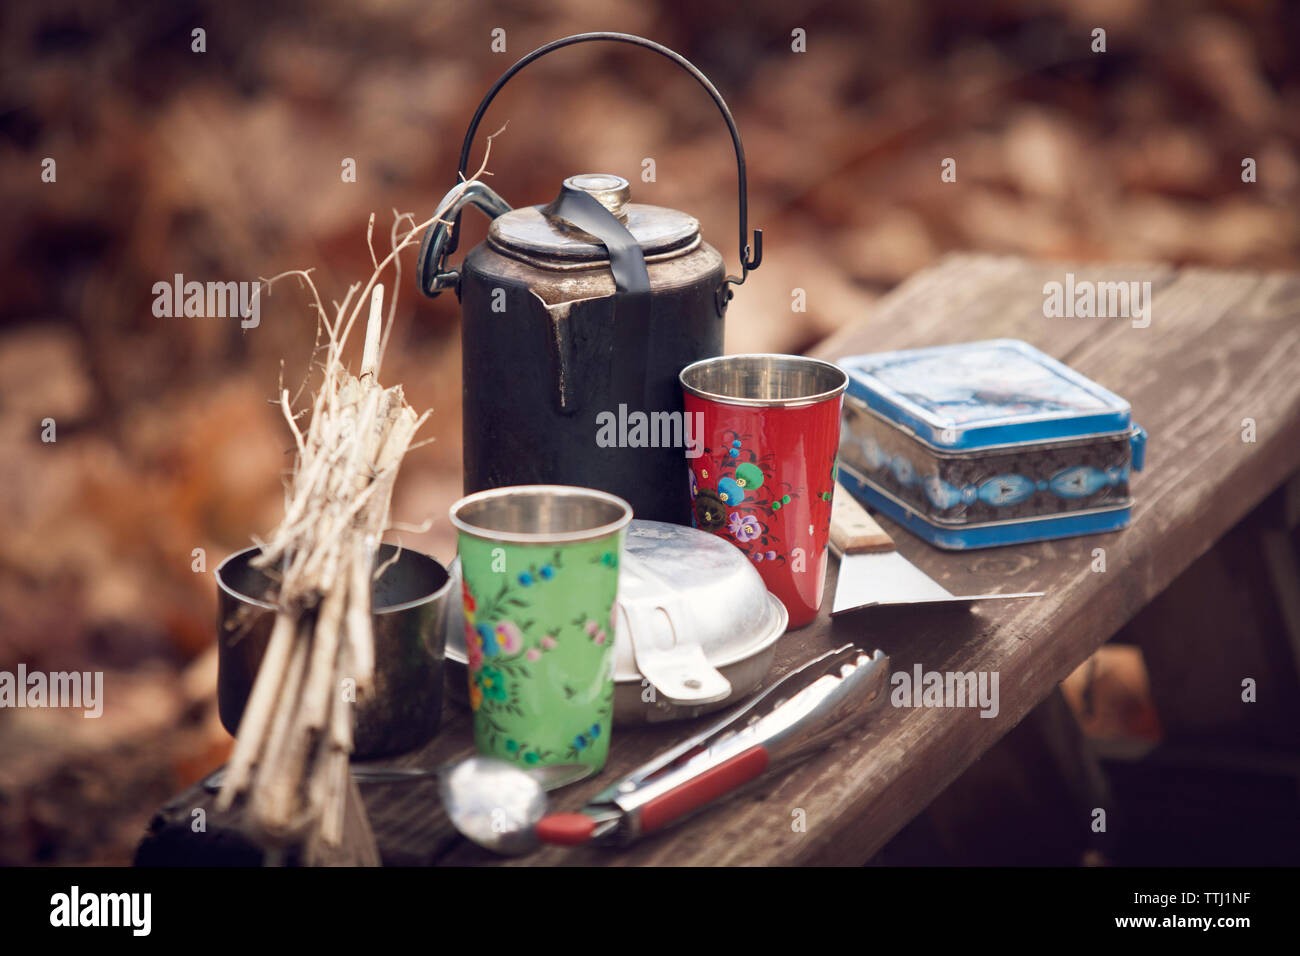 Camping objects on bench in forest Stock Photo